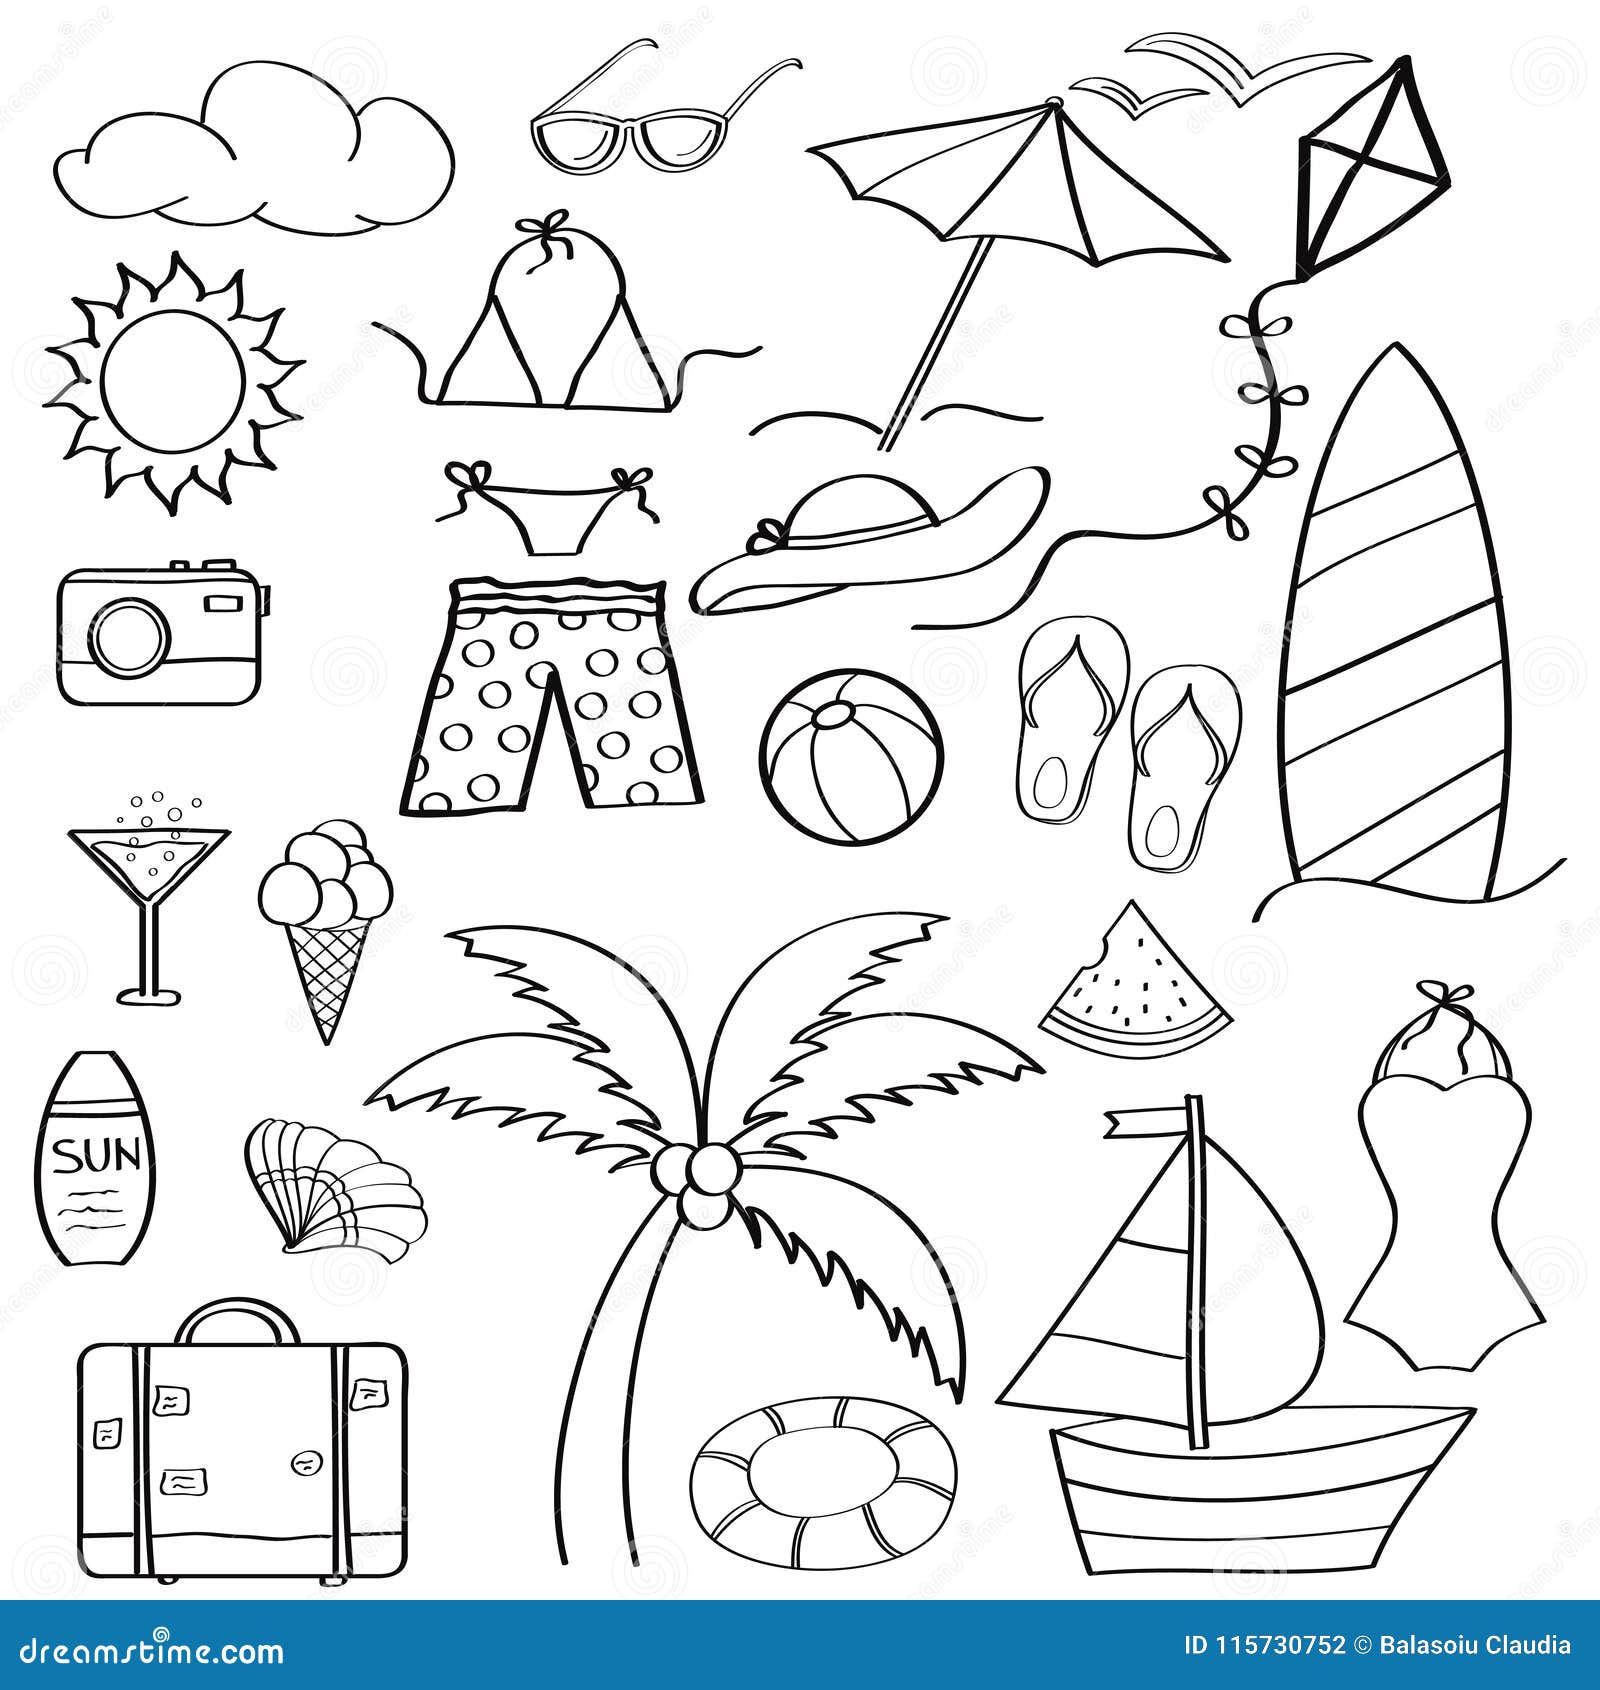 Doodle Cartoon Items Summer Holiday Collection for Coloring. Stock ...